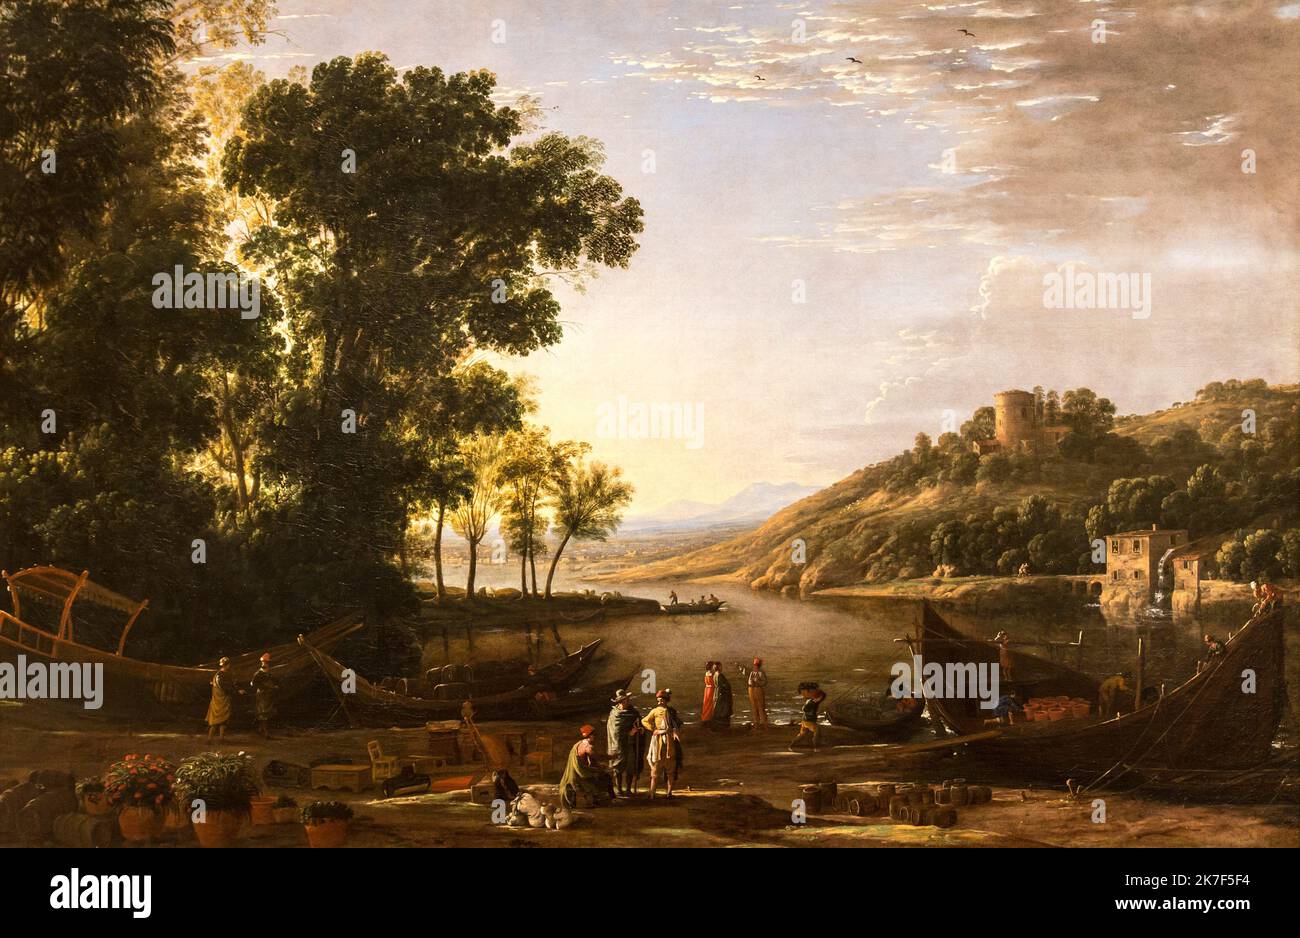 ©Active Museu/MAXPPP - ActiveMuseum 0000893.jpg / Paysage avec des Marchands, 1630 - Claude Lorrain - Landscape with Merchants 1630 - / Claude Lorrain / Peinture Active Museum / Le Pictorium Boat ,Classicism ,Flower ,Goods ,Group ,Horizontal ,Jar ,Landscape ,Nature ,Shopkeeper ,Sky ,Small boat ,Trade ,Tree ,Unloading ,watercourse ,Watermill ,17th century ,Claude Lorrain ,Painting ,  Stock Photo